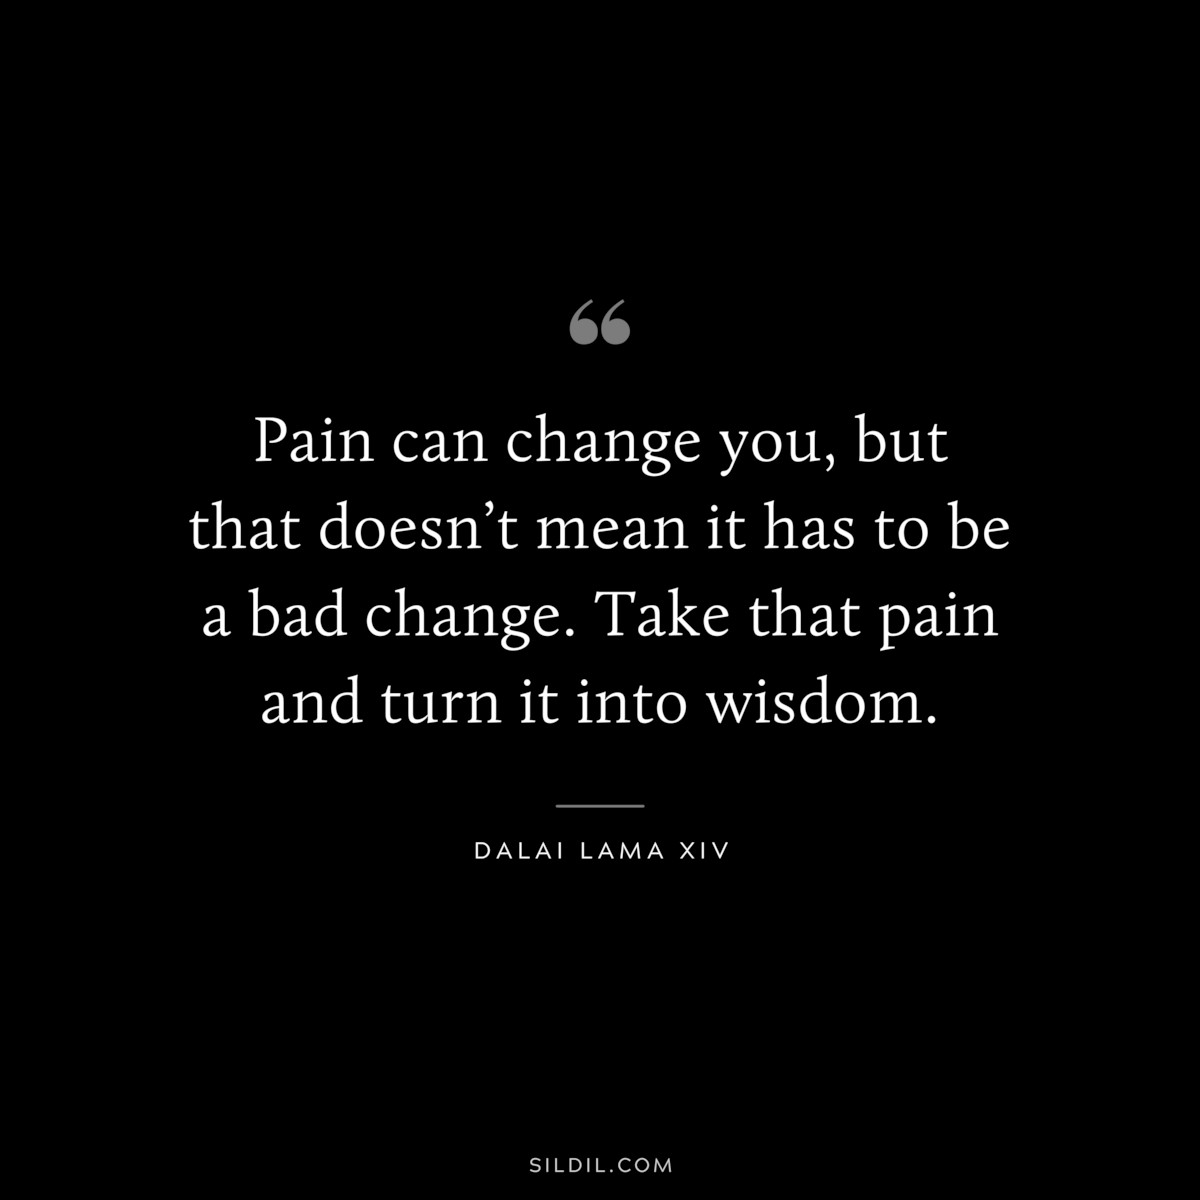 Pain can change you, but that doesn’t mean it has to be a bad change. Take that pain and turn it into wisdom. ― Dalai Lama XIV